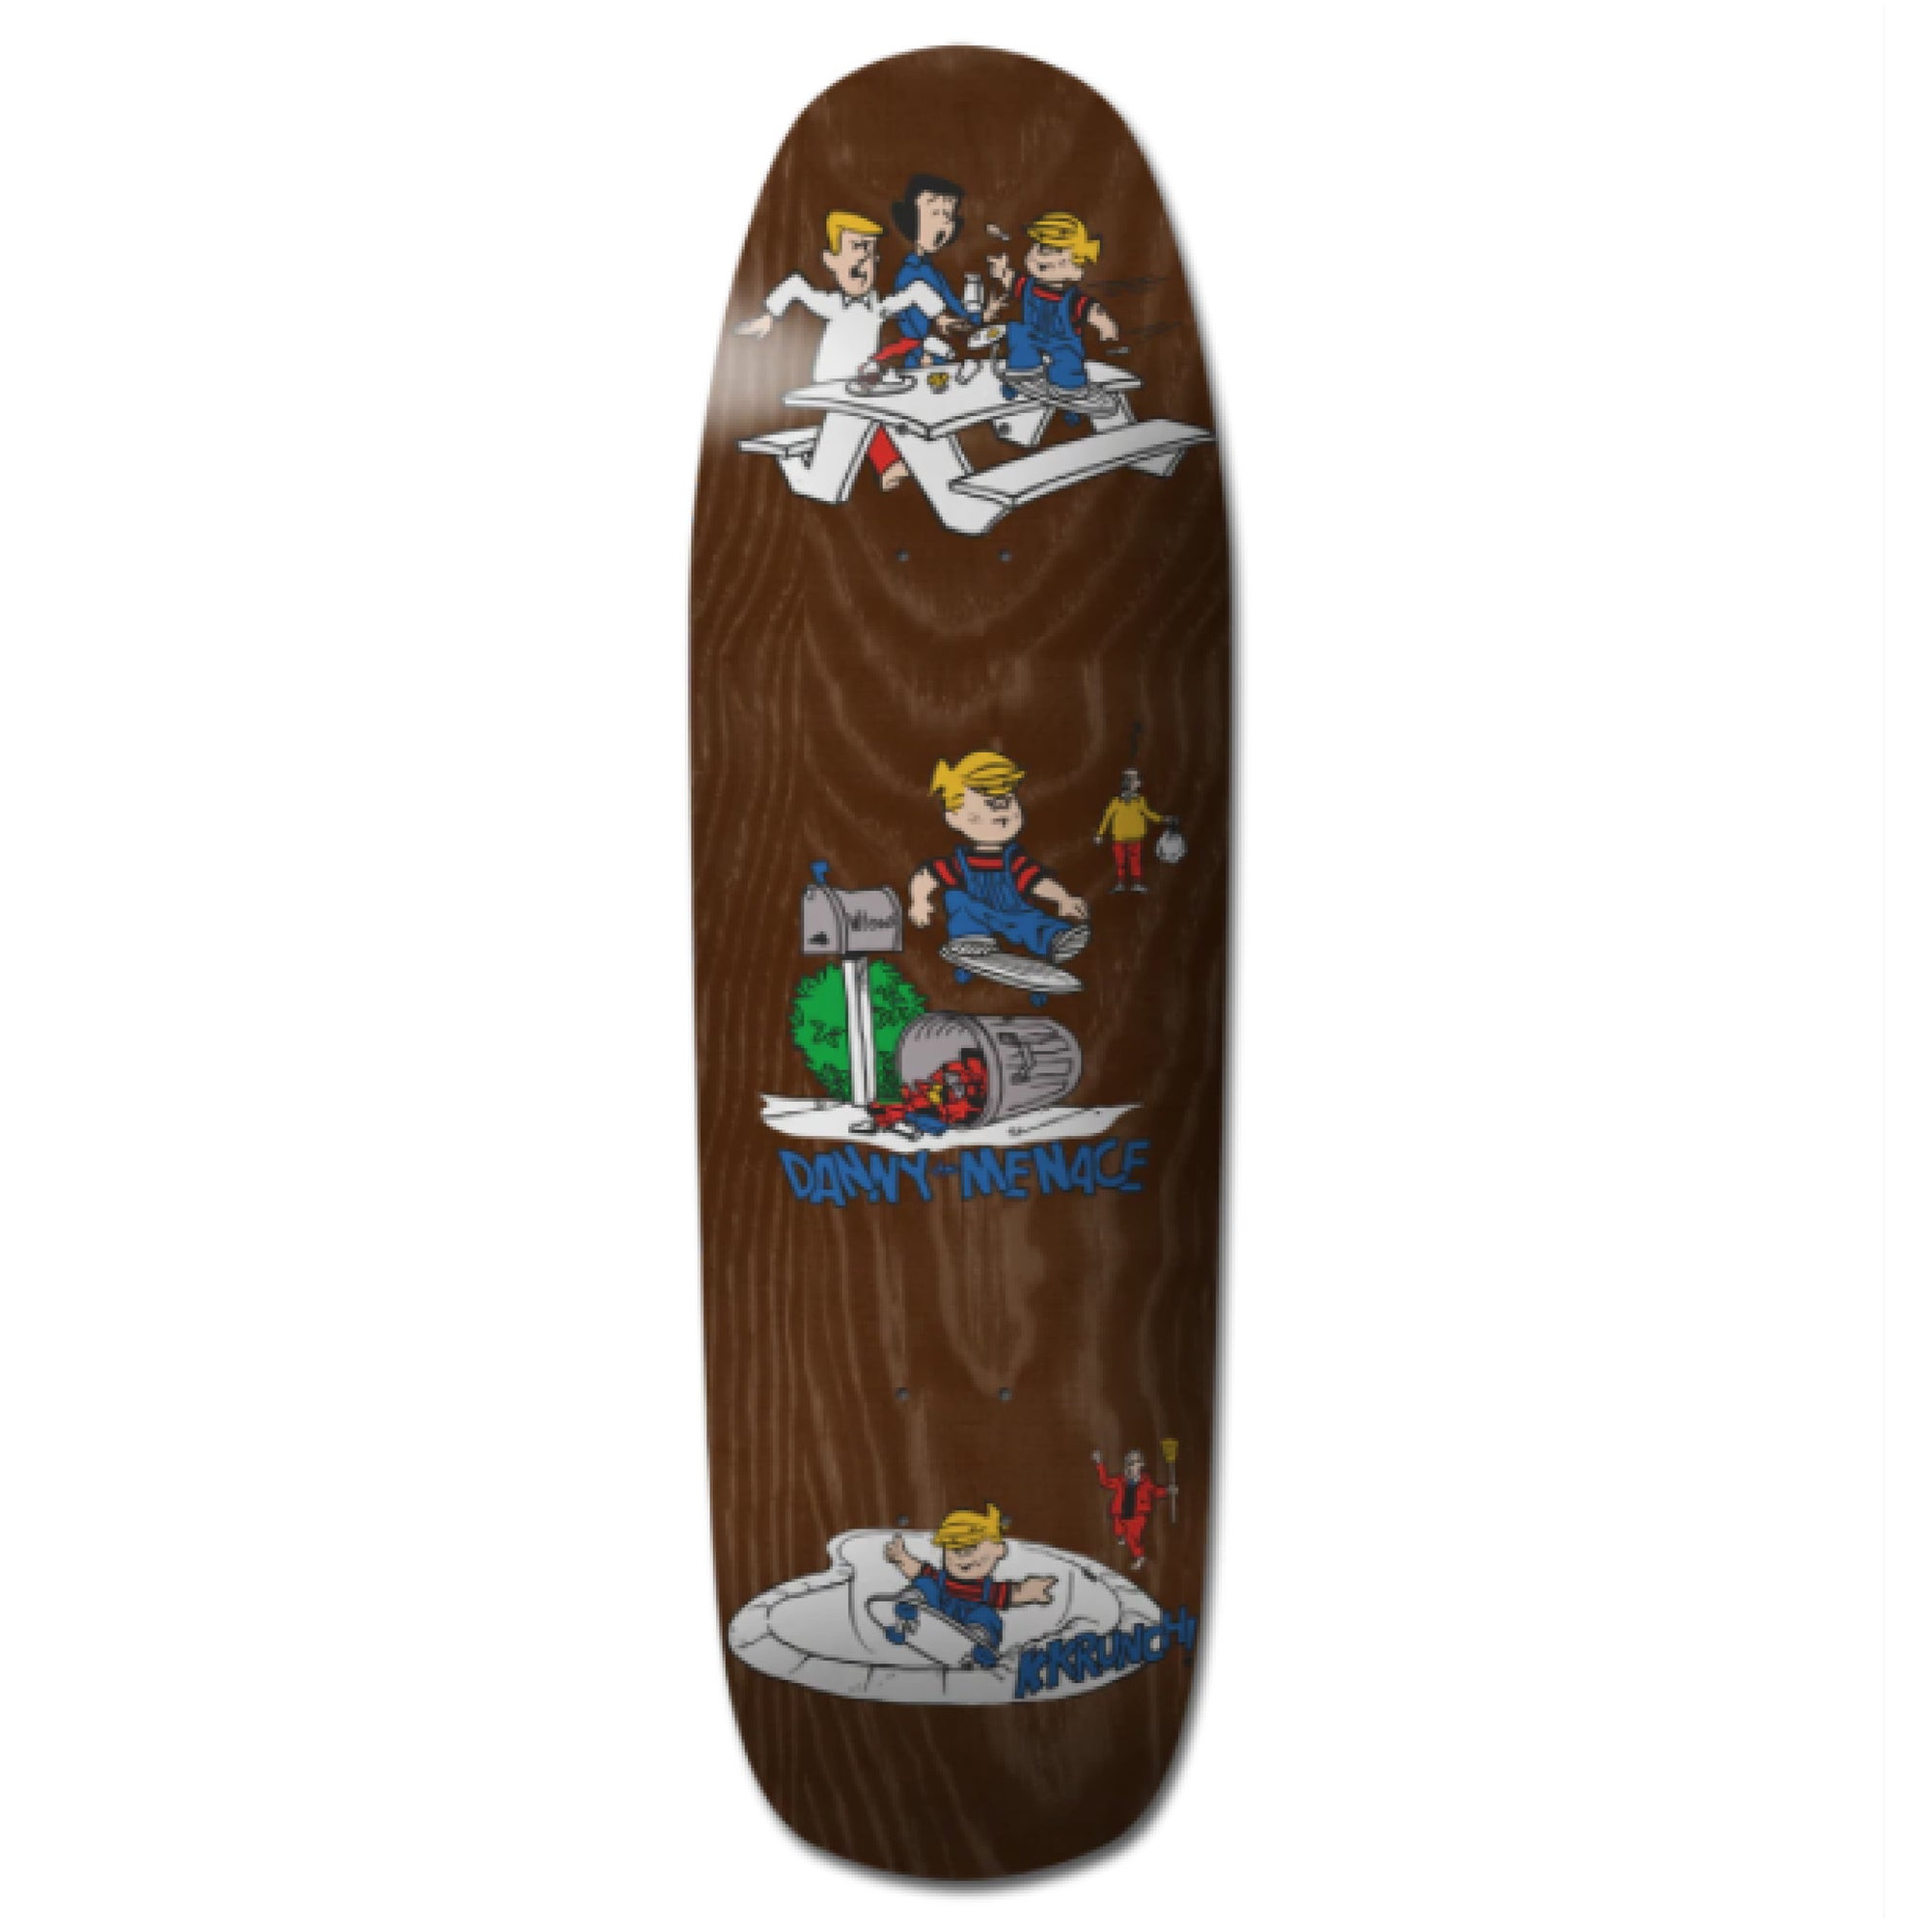 PLAN B DECK - DANNY WAY "DANNY THE MENACE" RE-ISSUE (9.25") - The Drive Skateshop